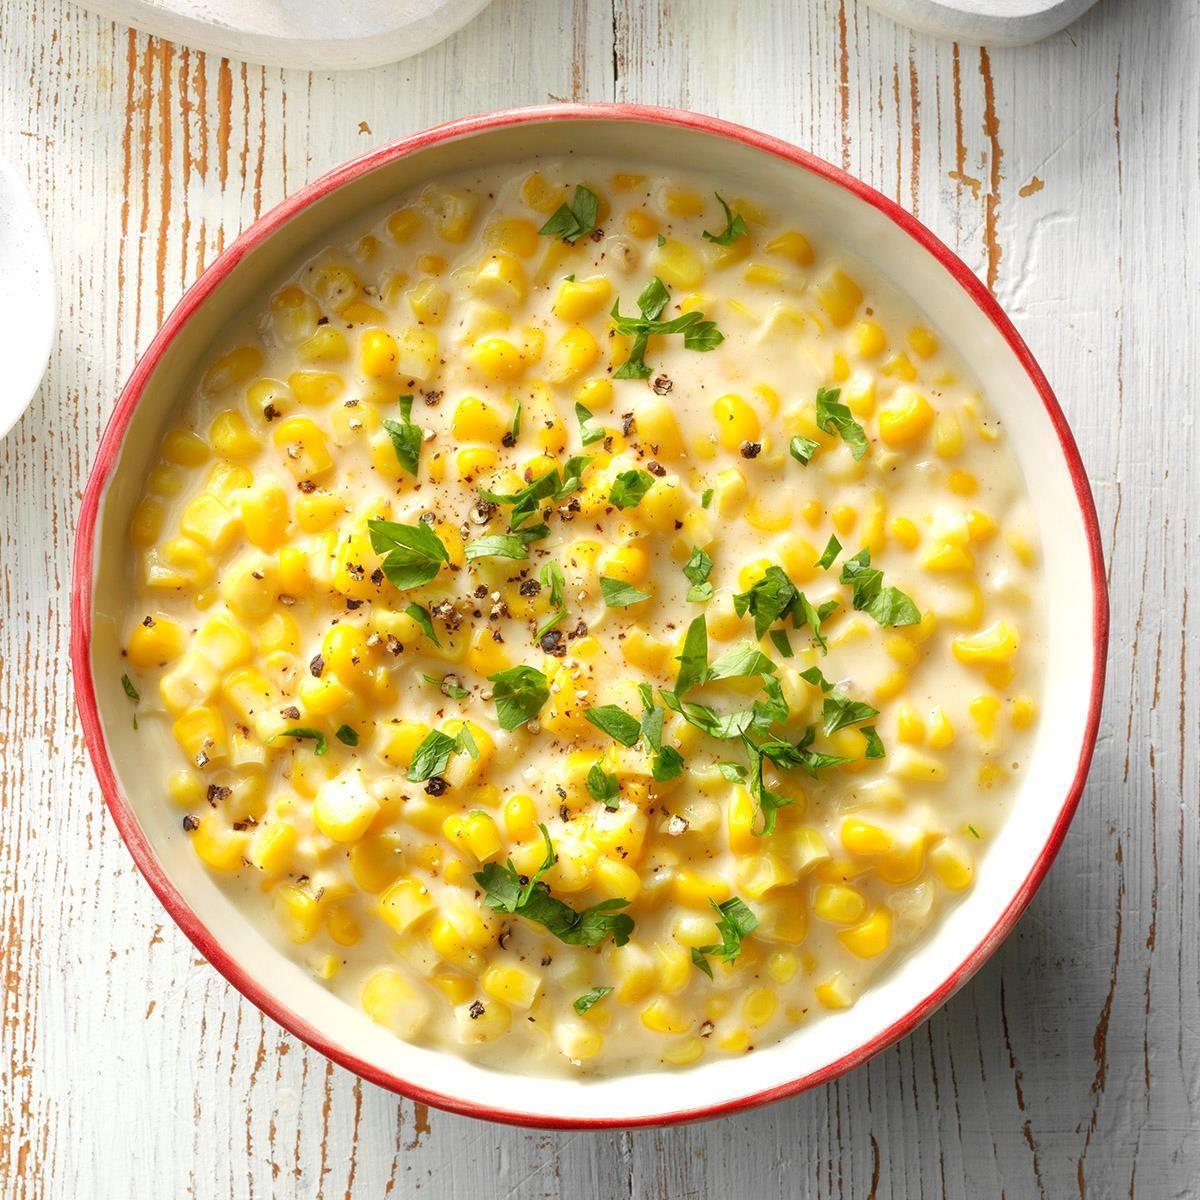 Makeover Creamed Corn Recipe: How to Make It | Taste of Home